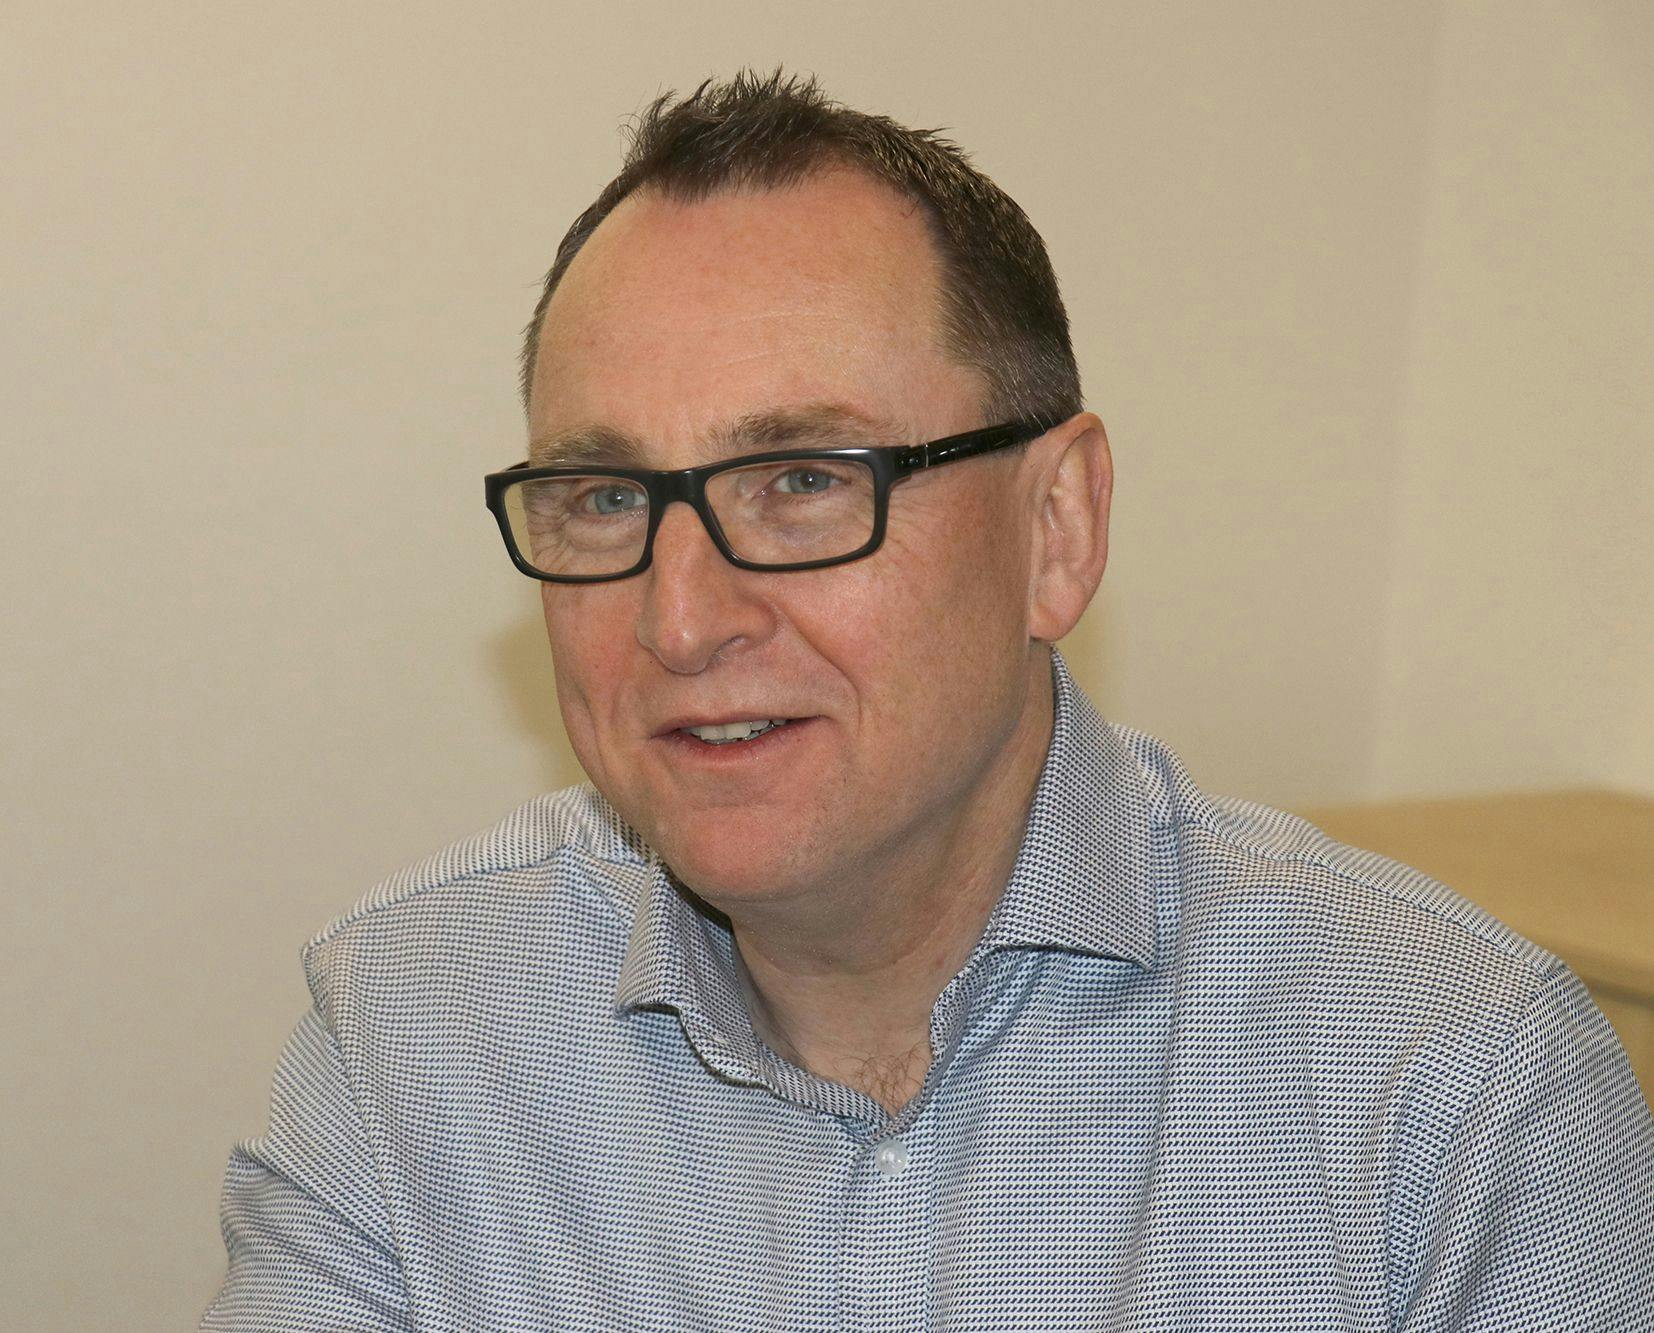 Tony Taylor is Group Technical Director of Crawford Scientific Group and CHROMacademy.

